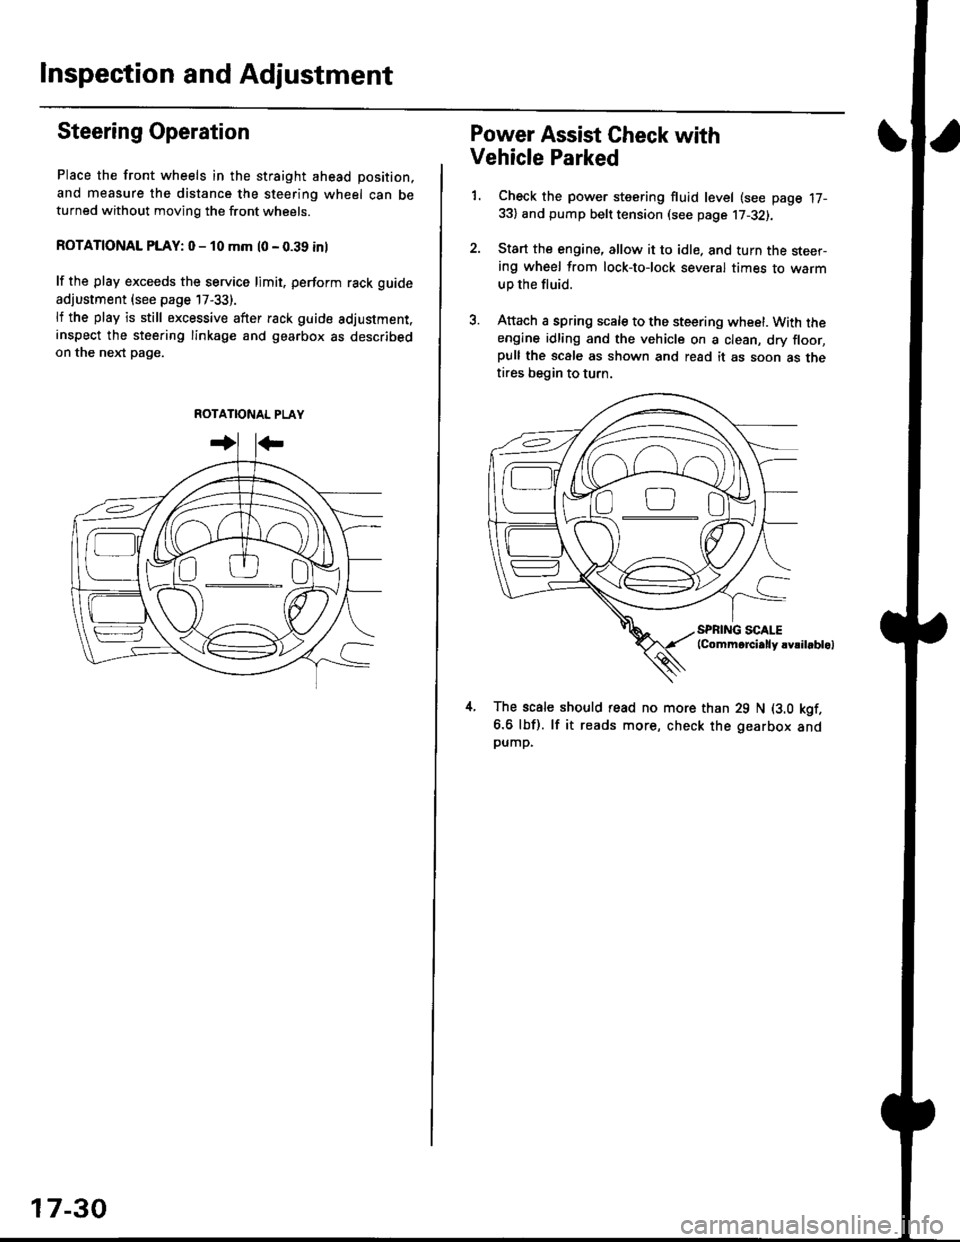 HONDA CIVIC 1998 6.G Workshop Manual Inspection and Adjustment
Steering Operation
Place the front wheels in the straight ahead position,
and measure the distance the steering wheel can beturned without moving the front wheels.
ROTATIONAL